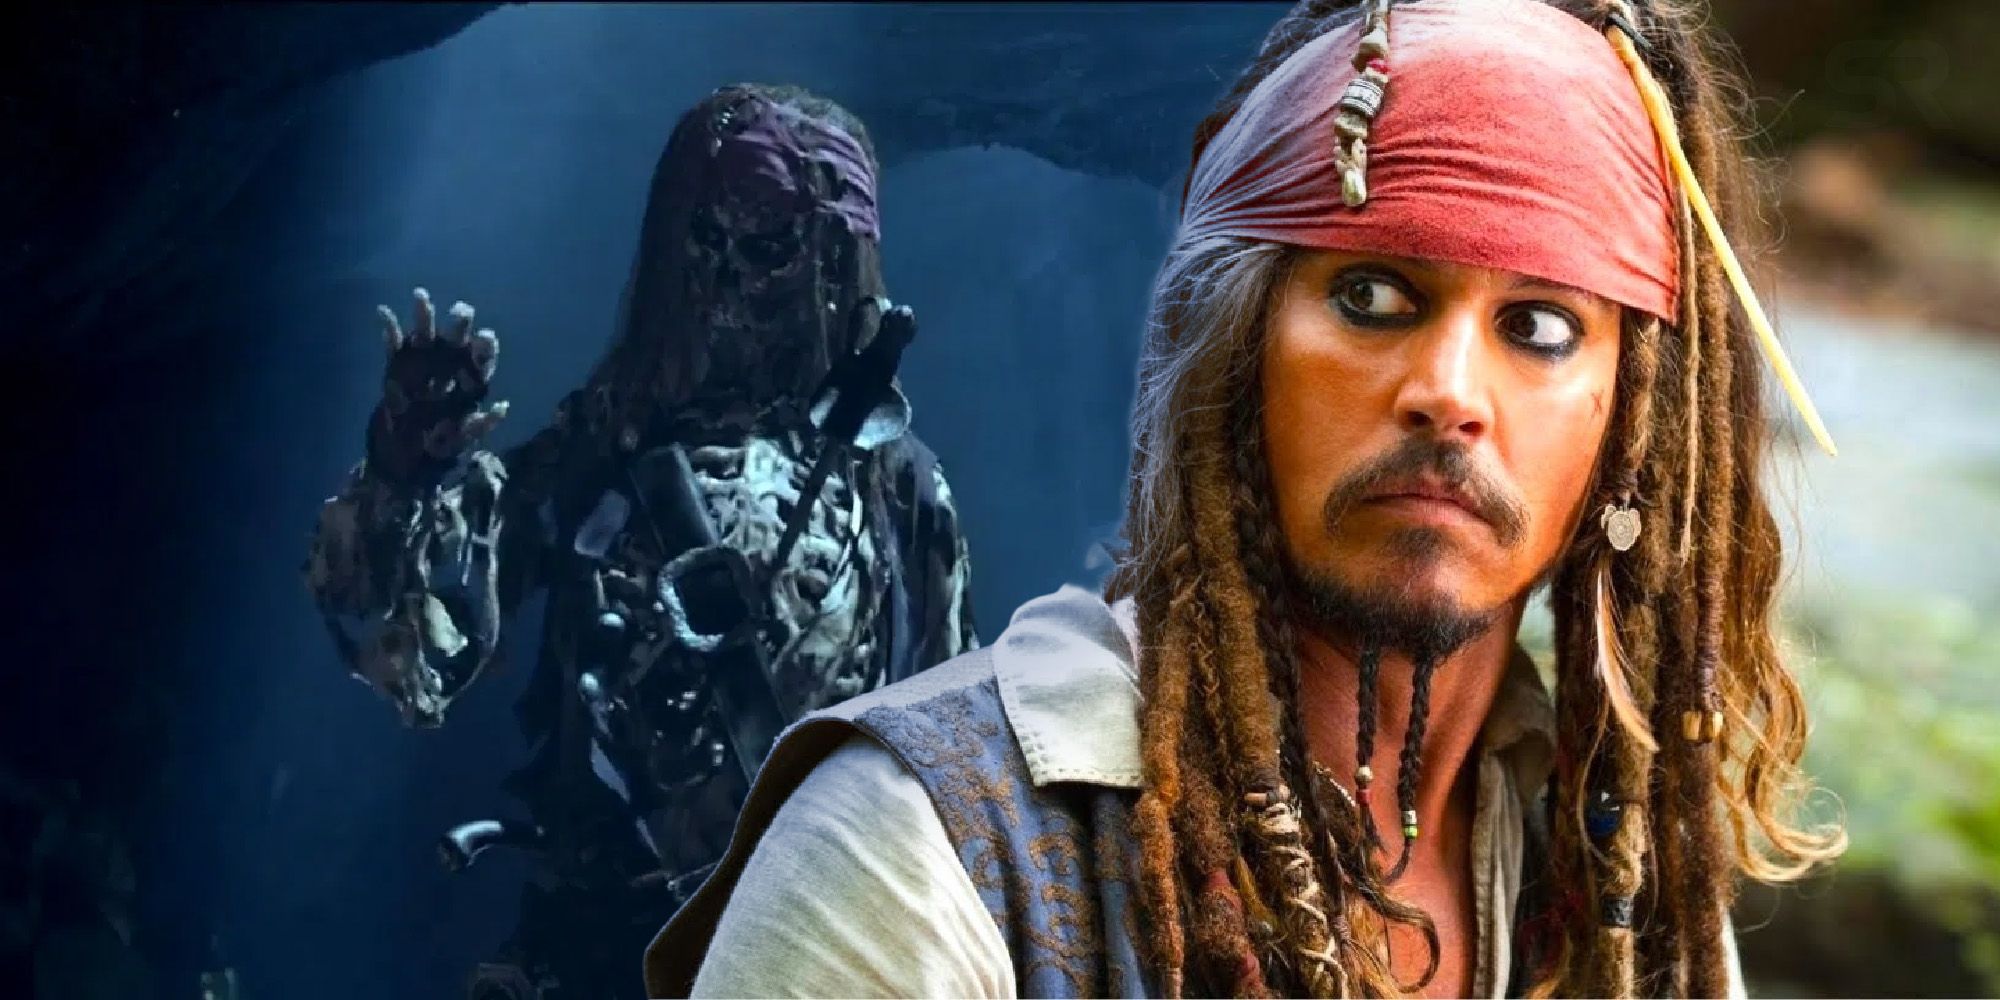 Pirates Of The Caribbean Why Jack Sparrow Is Cursed By The Black Pearl